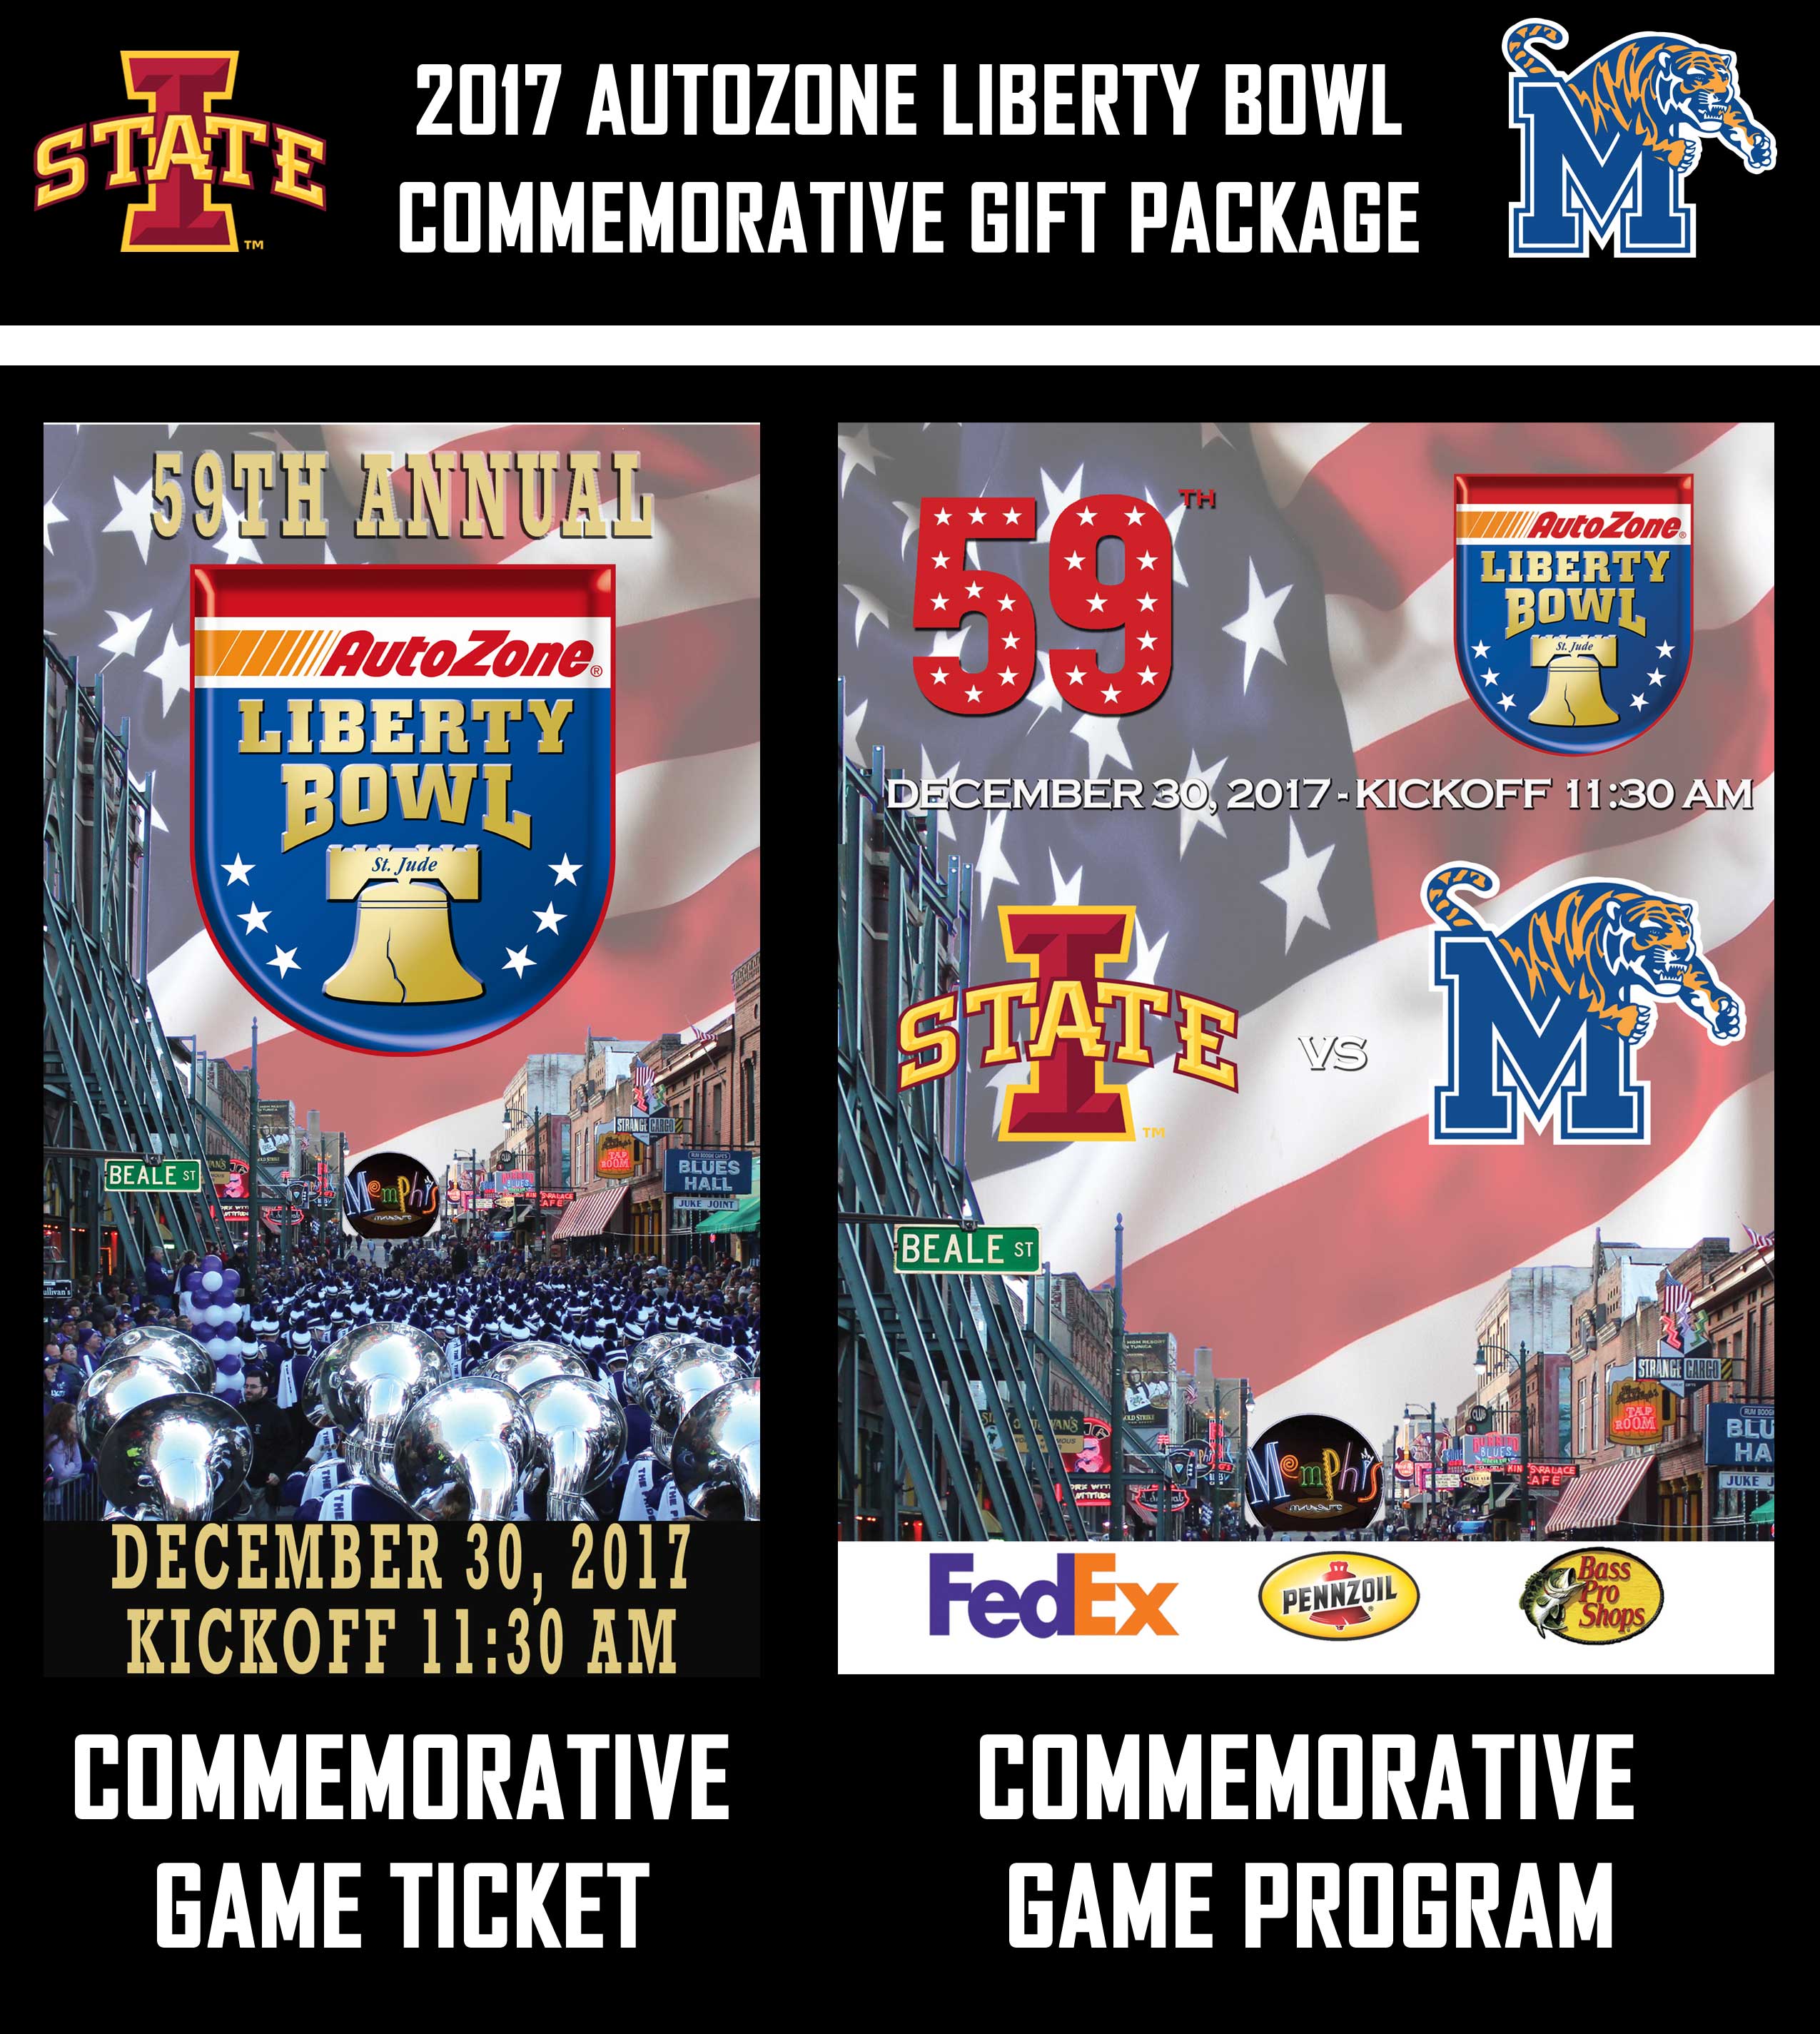 Commemorative Gft Package